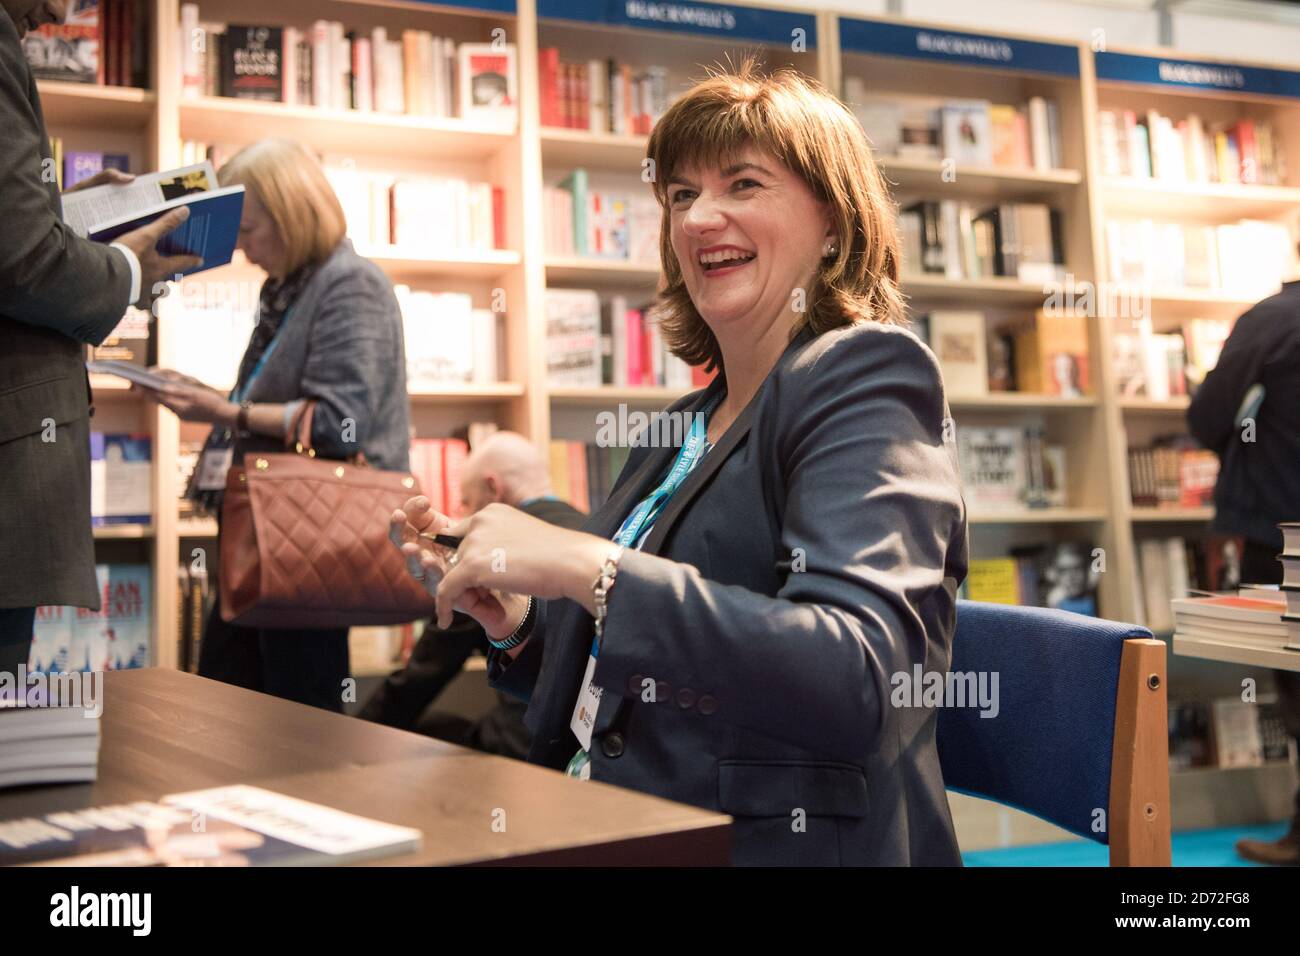 Nicky Morgan signs copies of her book at the Conservative Party Conference, at the Manchester Central Convention Complex in Manchester. Picture date: 2 October, 2017. Photo credit should read: Matt Crossick/ EMPICS Entertainment. Stock Photo